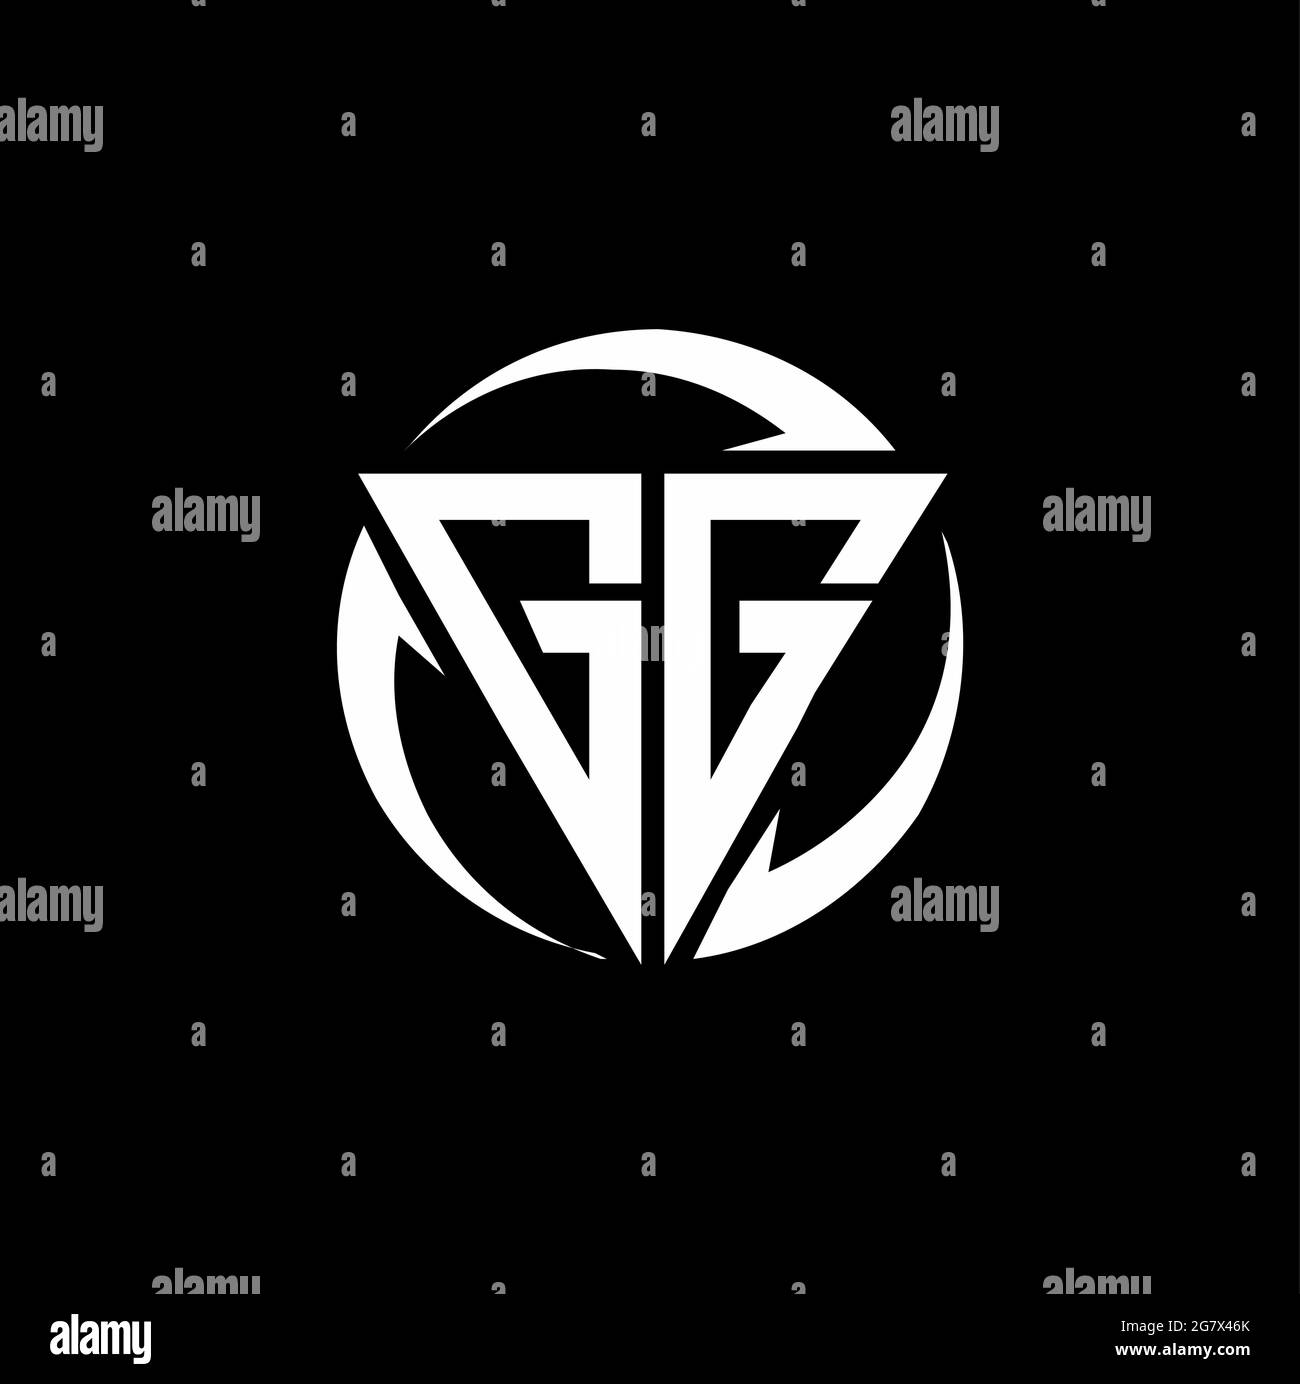 GG logo with triangle shape and circle rounded design template isolated on black background Stock Vector